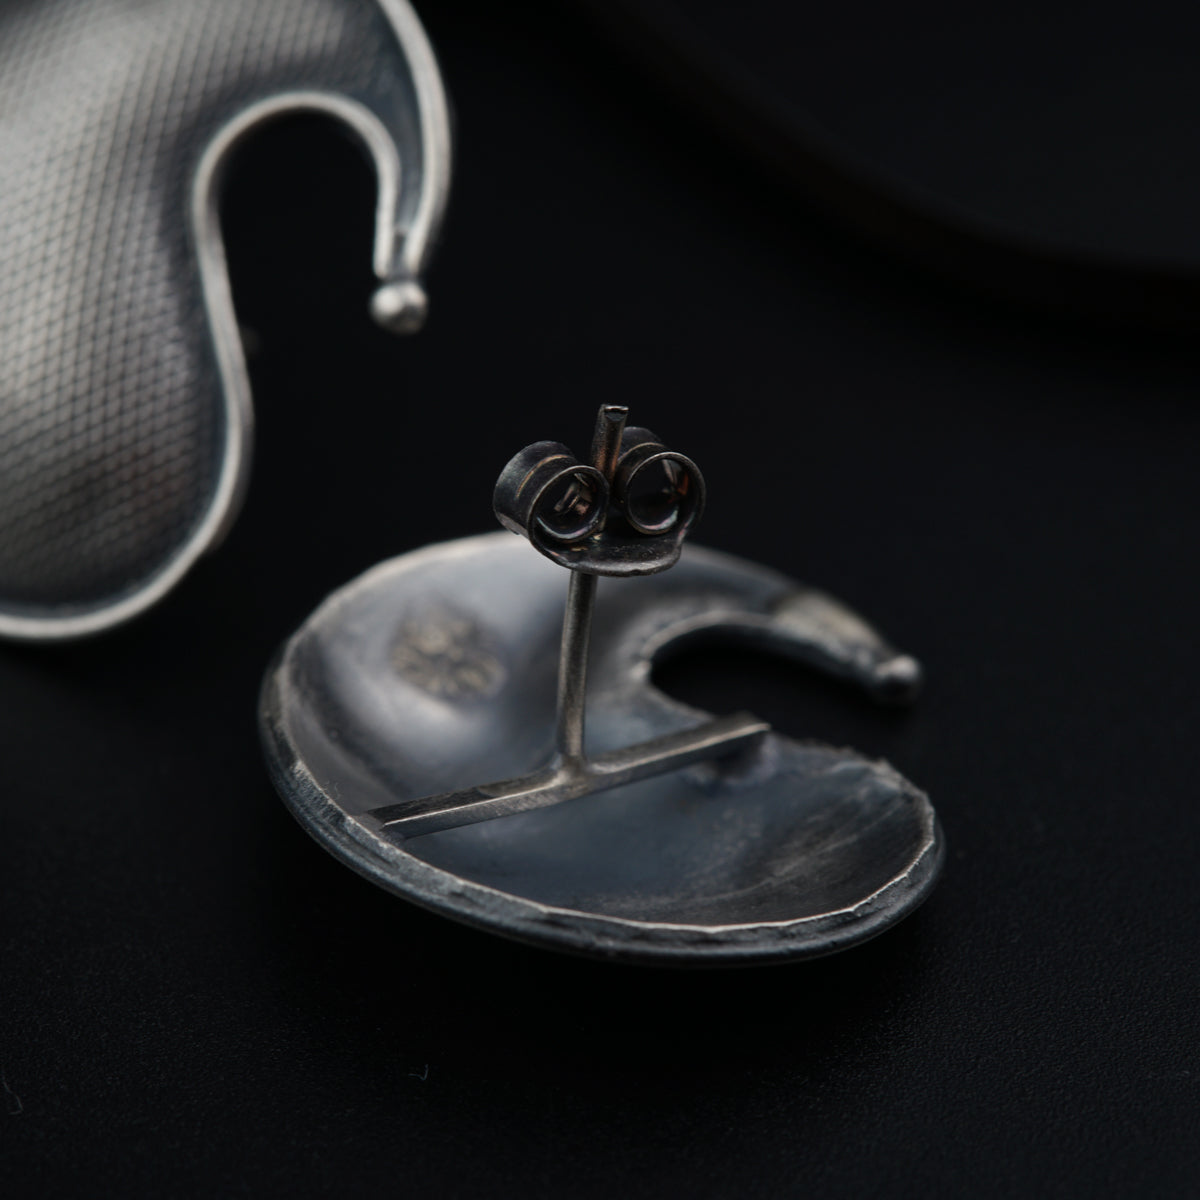 a pair of silver ear clips sitting on top of a black surface